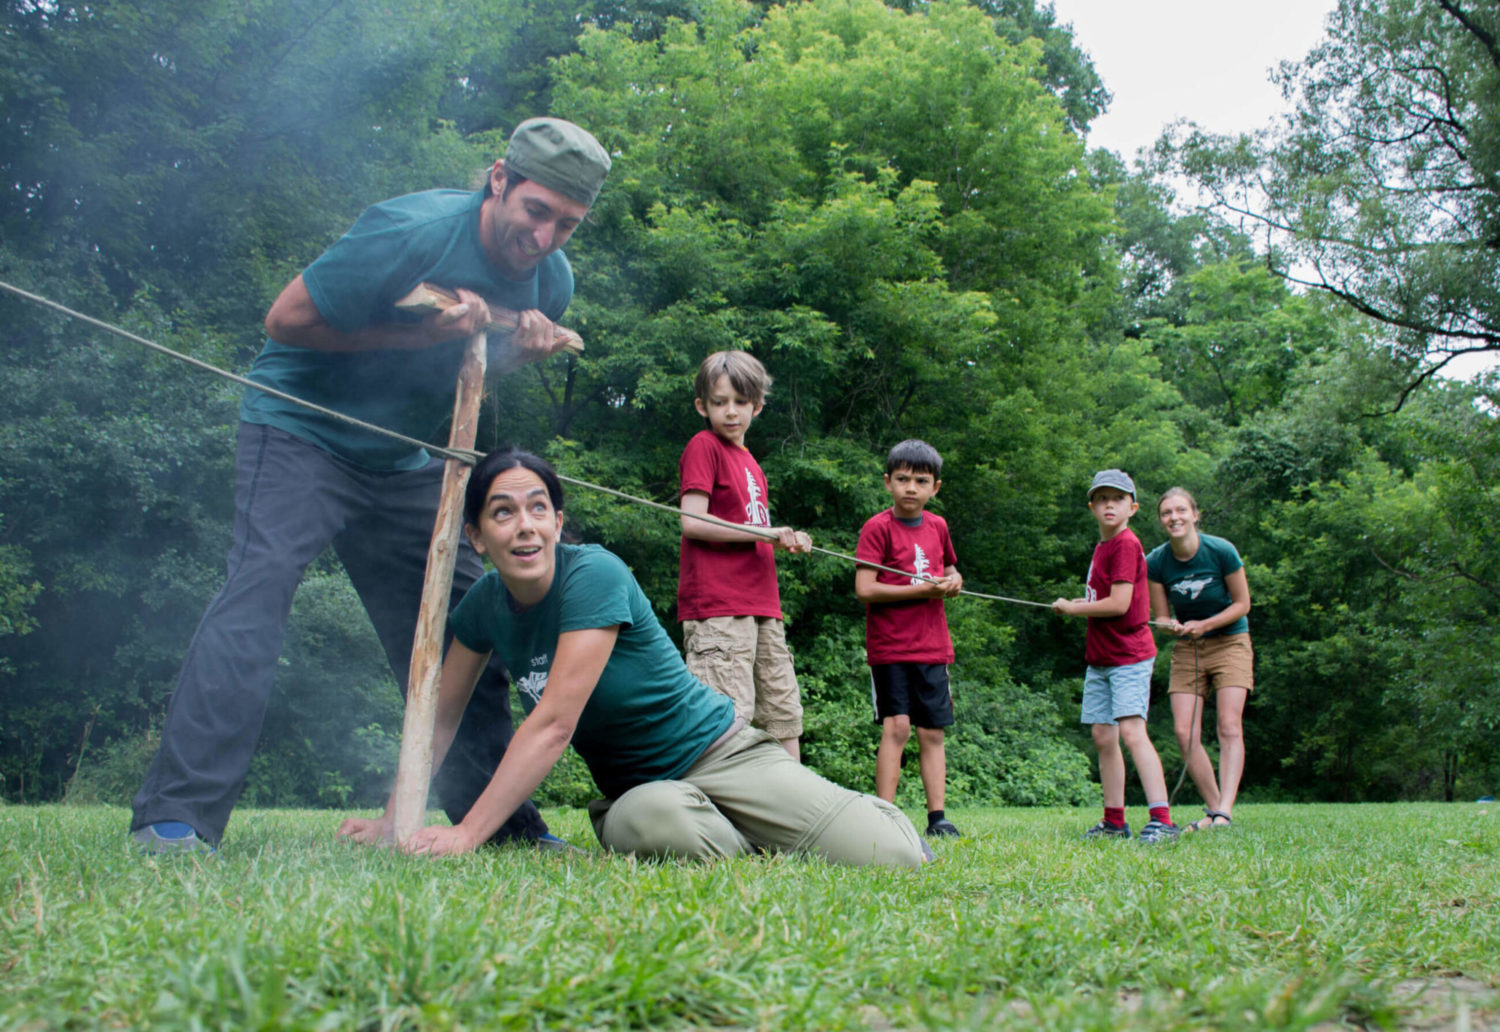 Join us! Office Administrator, Outdoor School Instructors, and other positions available.